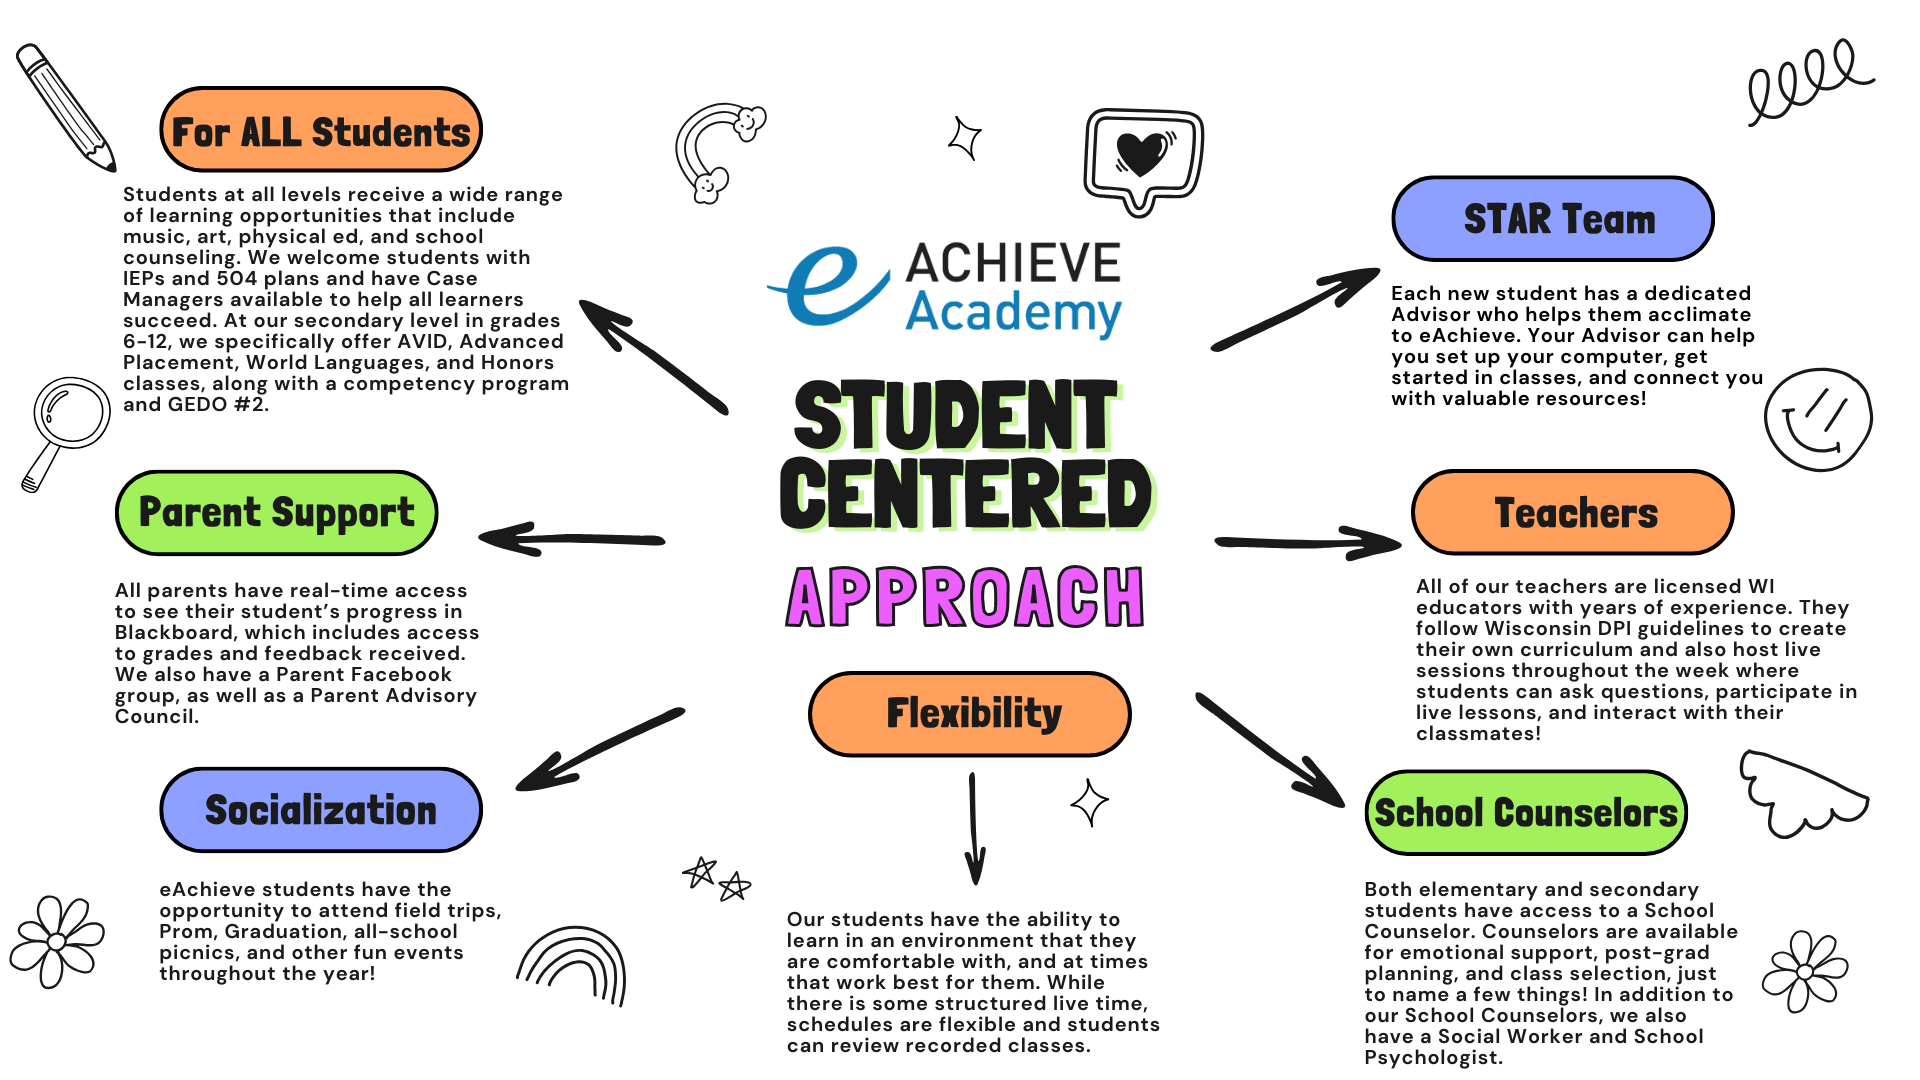 Student Centered Approach